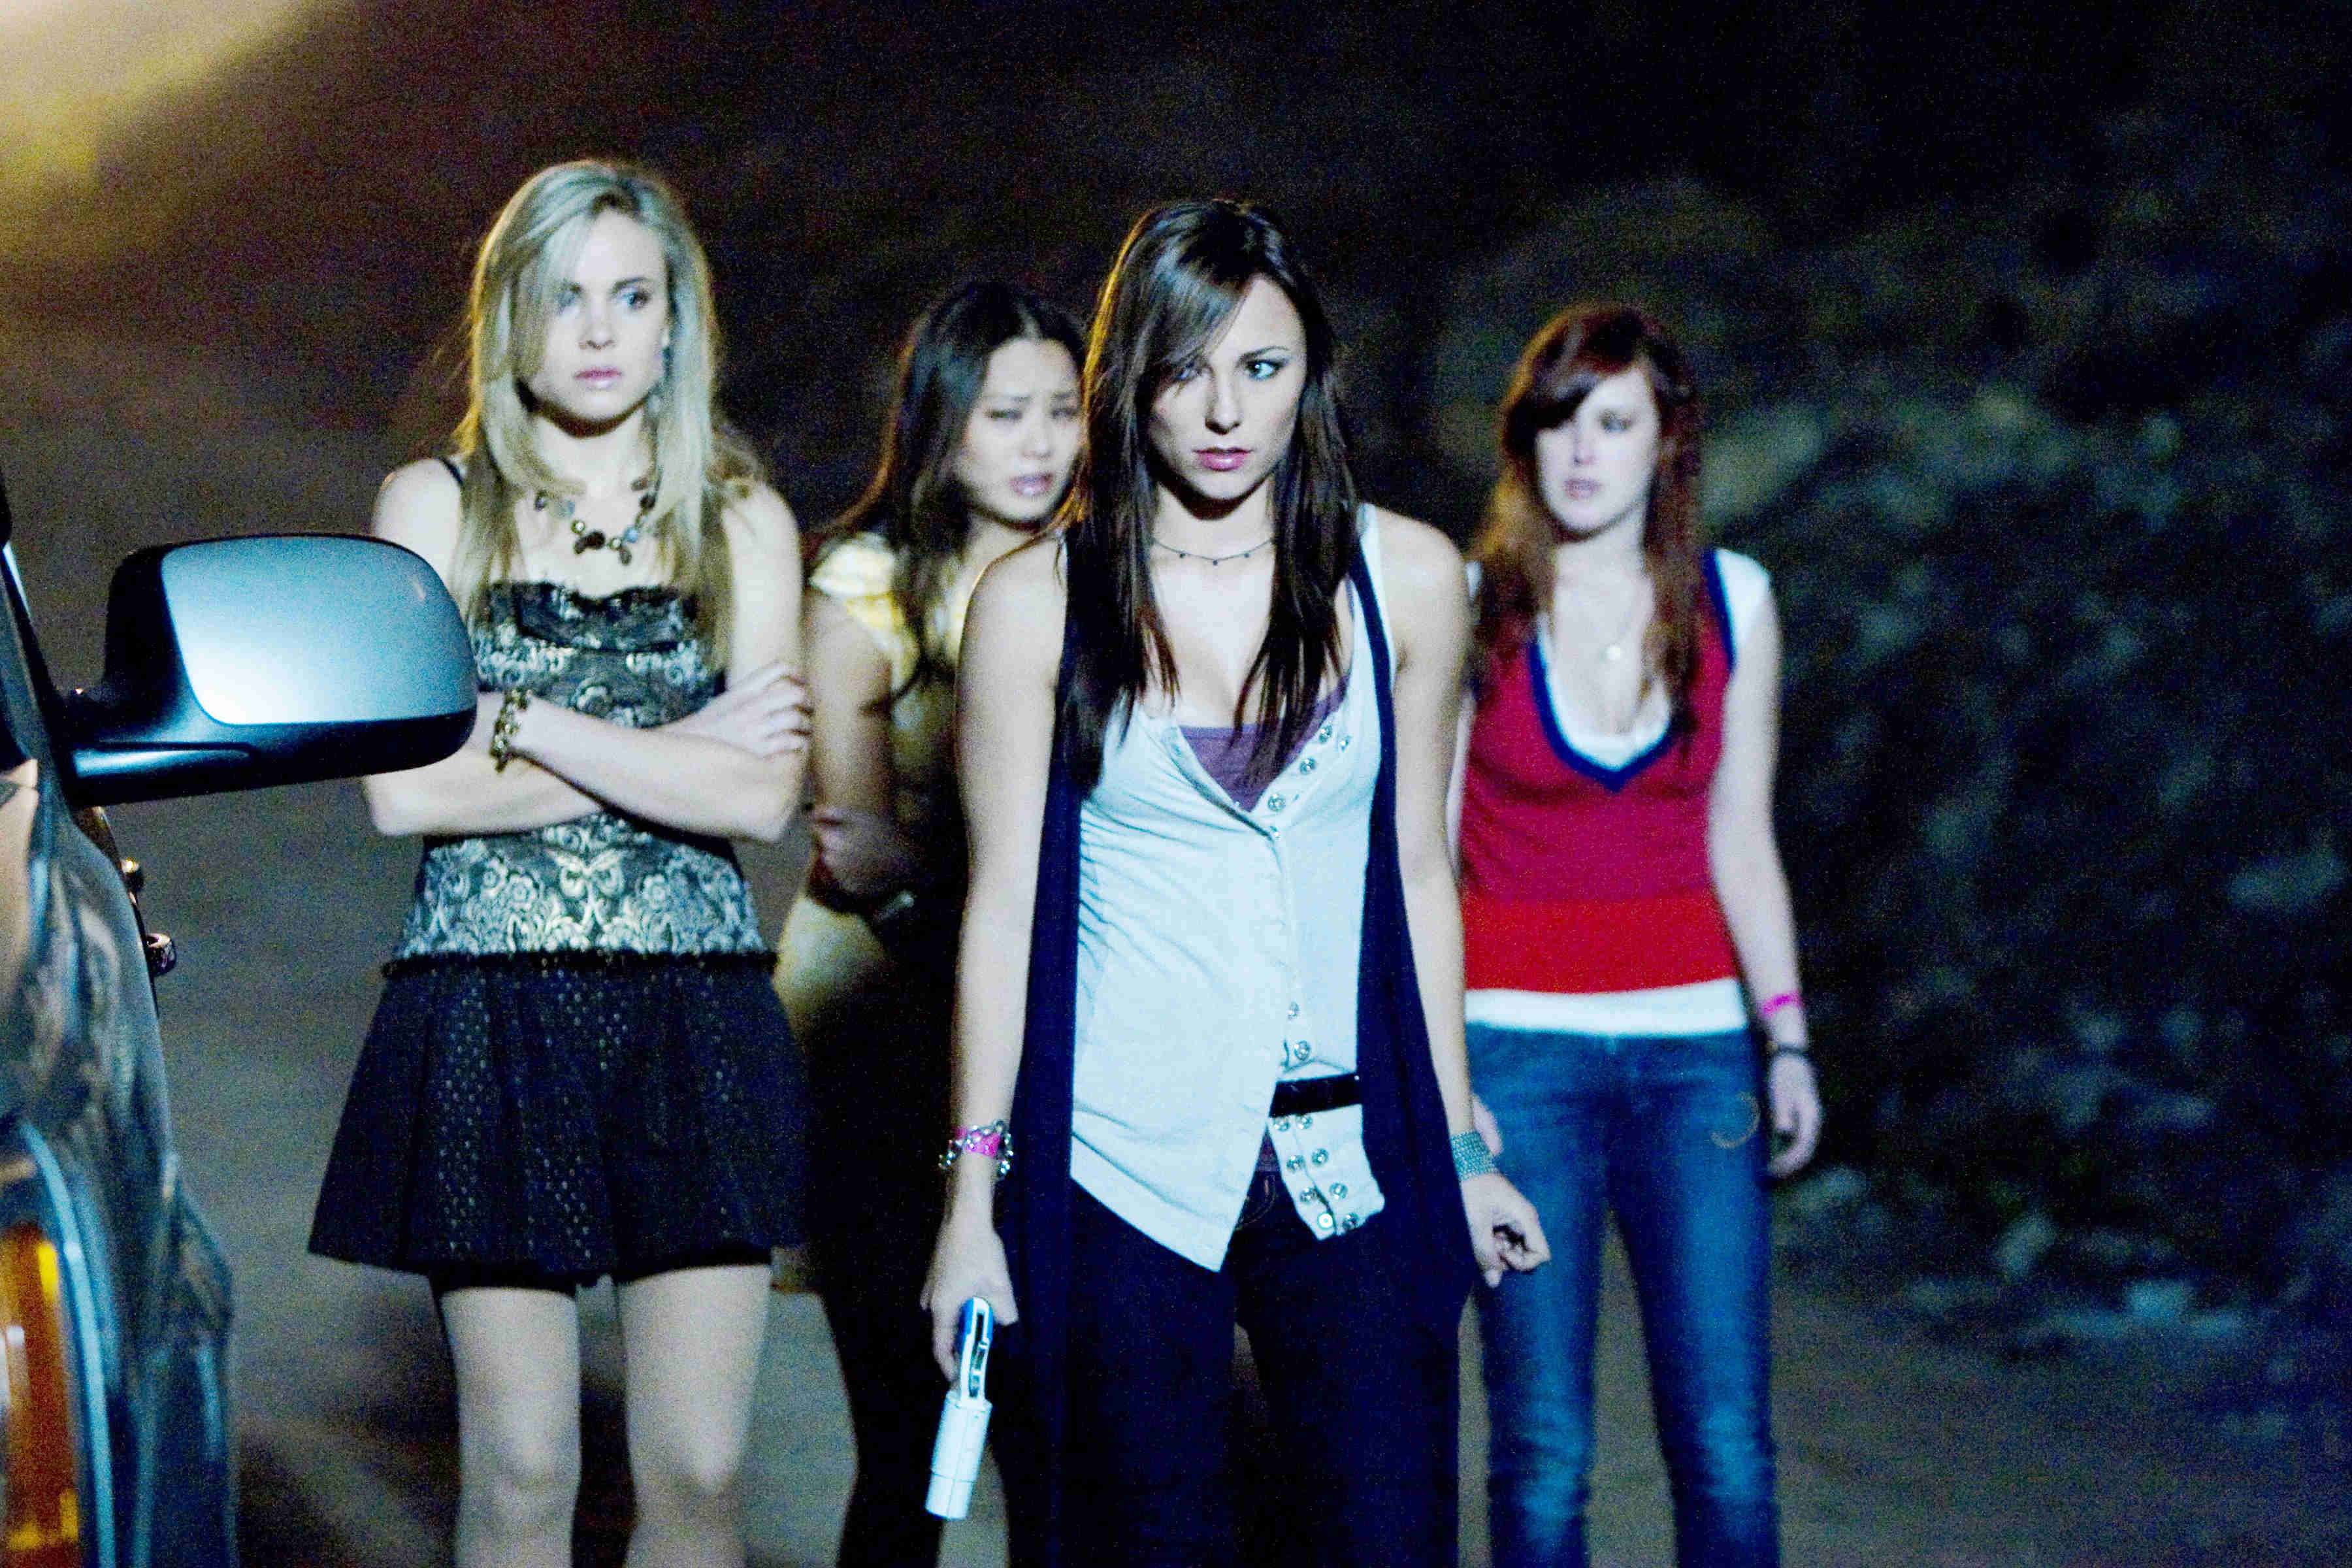 Leah Pipes, Jamie Chung, Briana Evigan and Rumer Willis in Summit Entertainment's Sorority Row (2009)